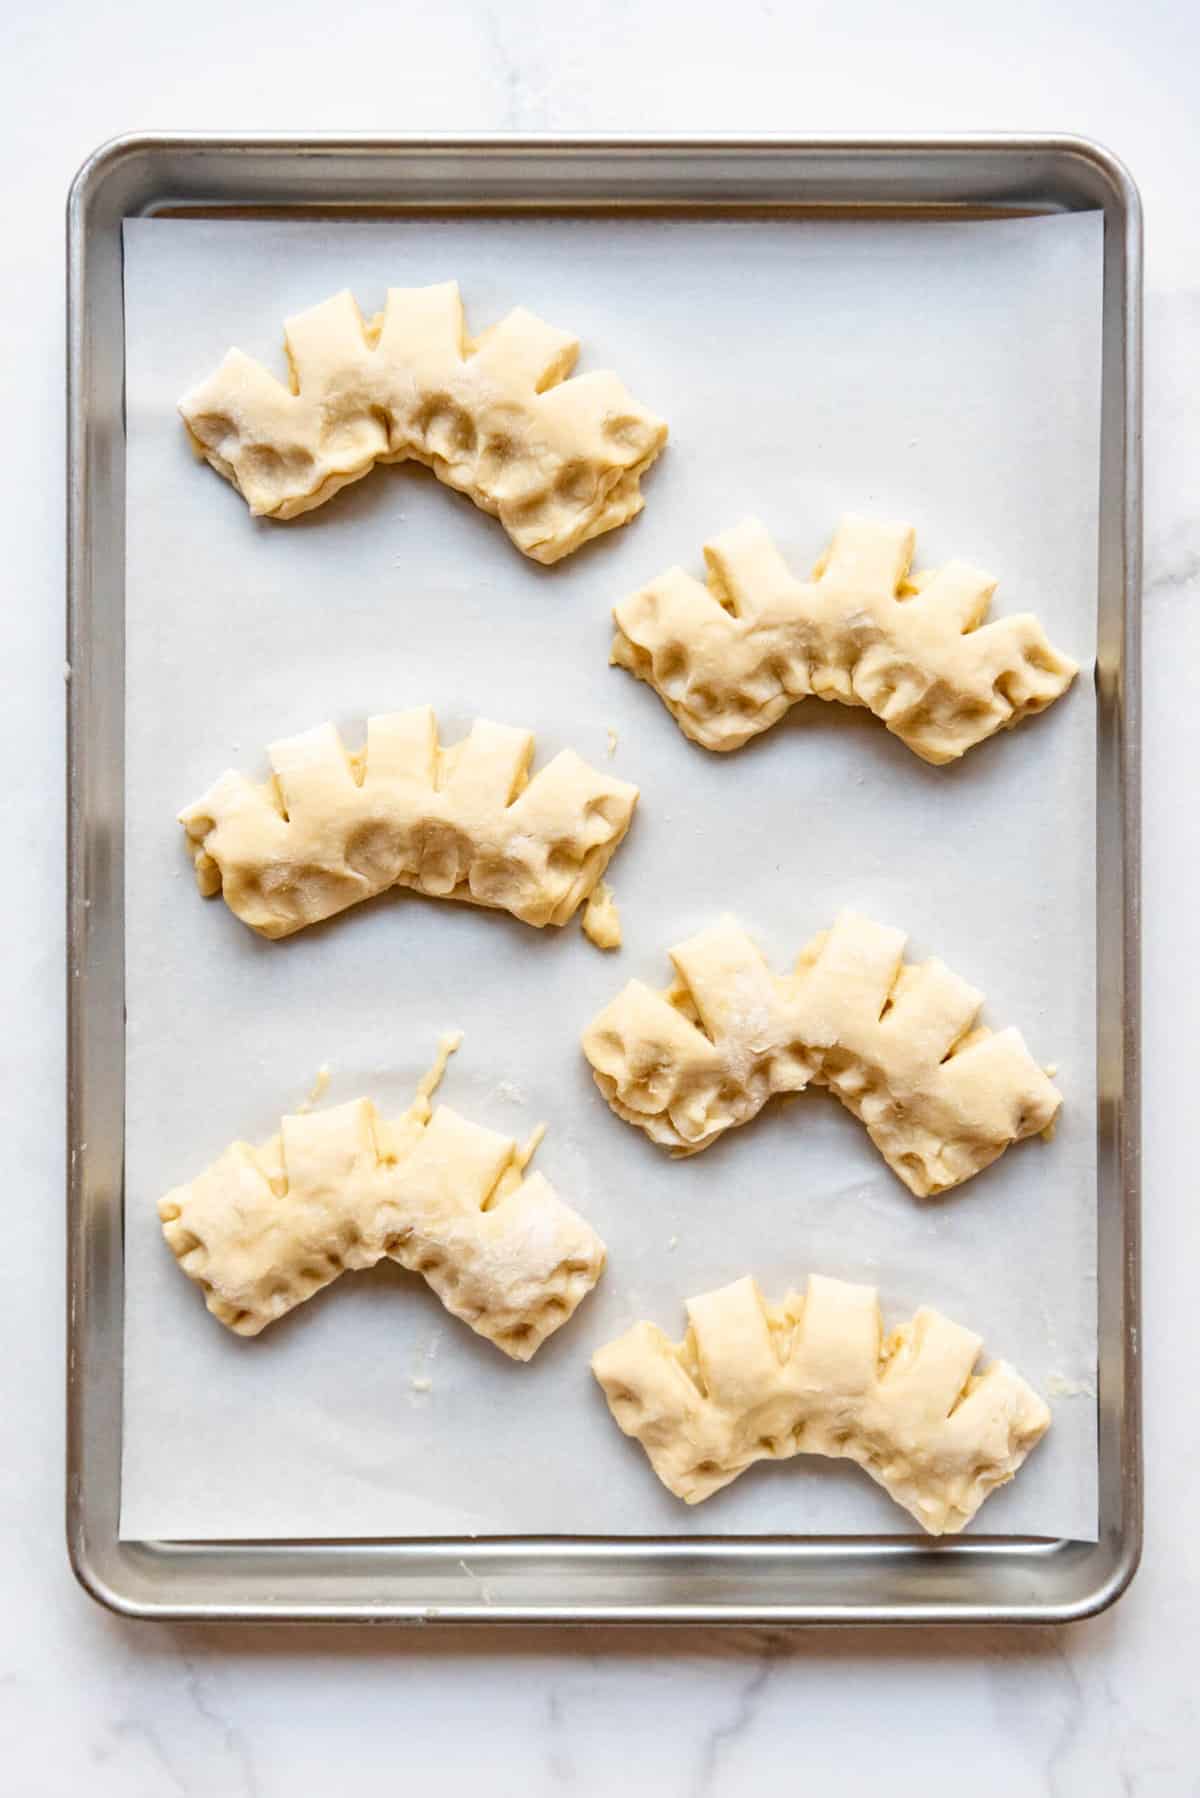 Shaped bear claw pastries on a baking sheet lined with parchment paper.